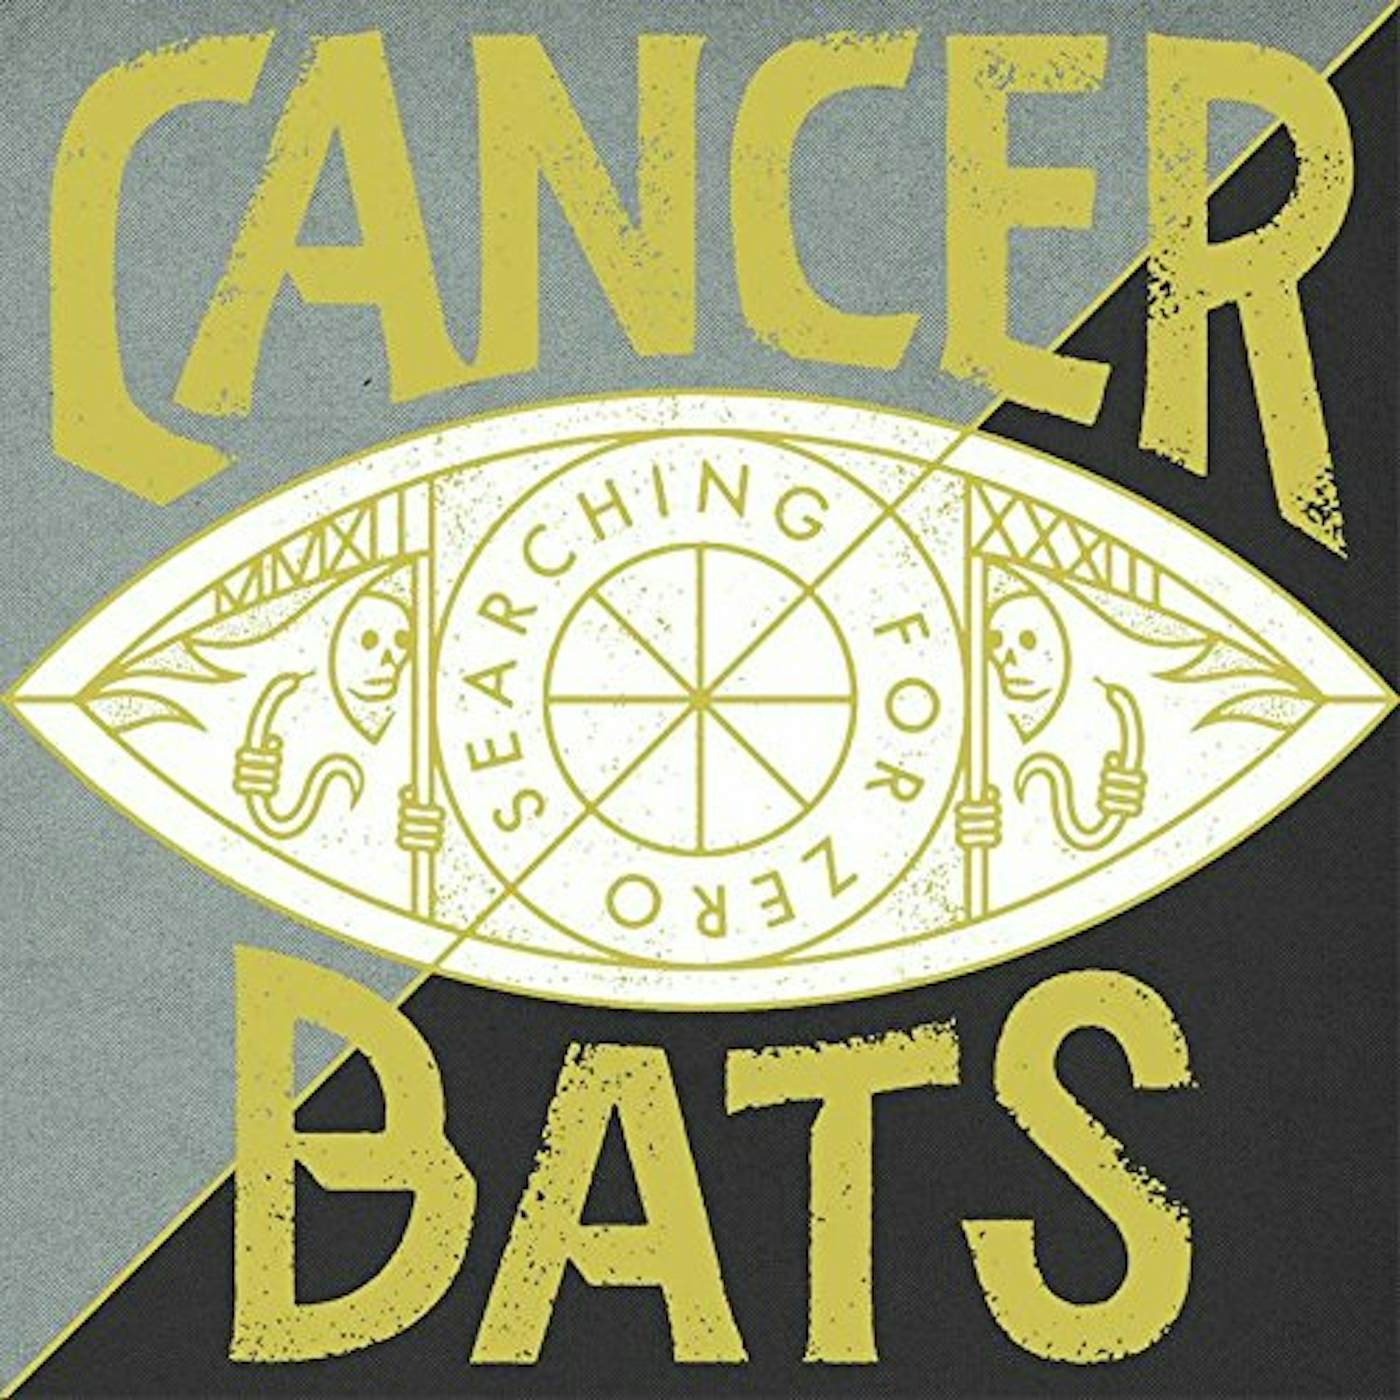 Cancer Bats Searching For Zero Vinyl Record